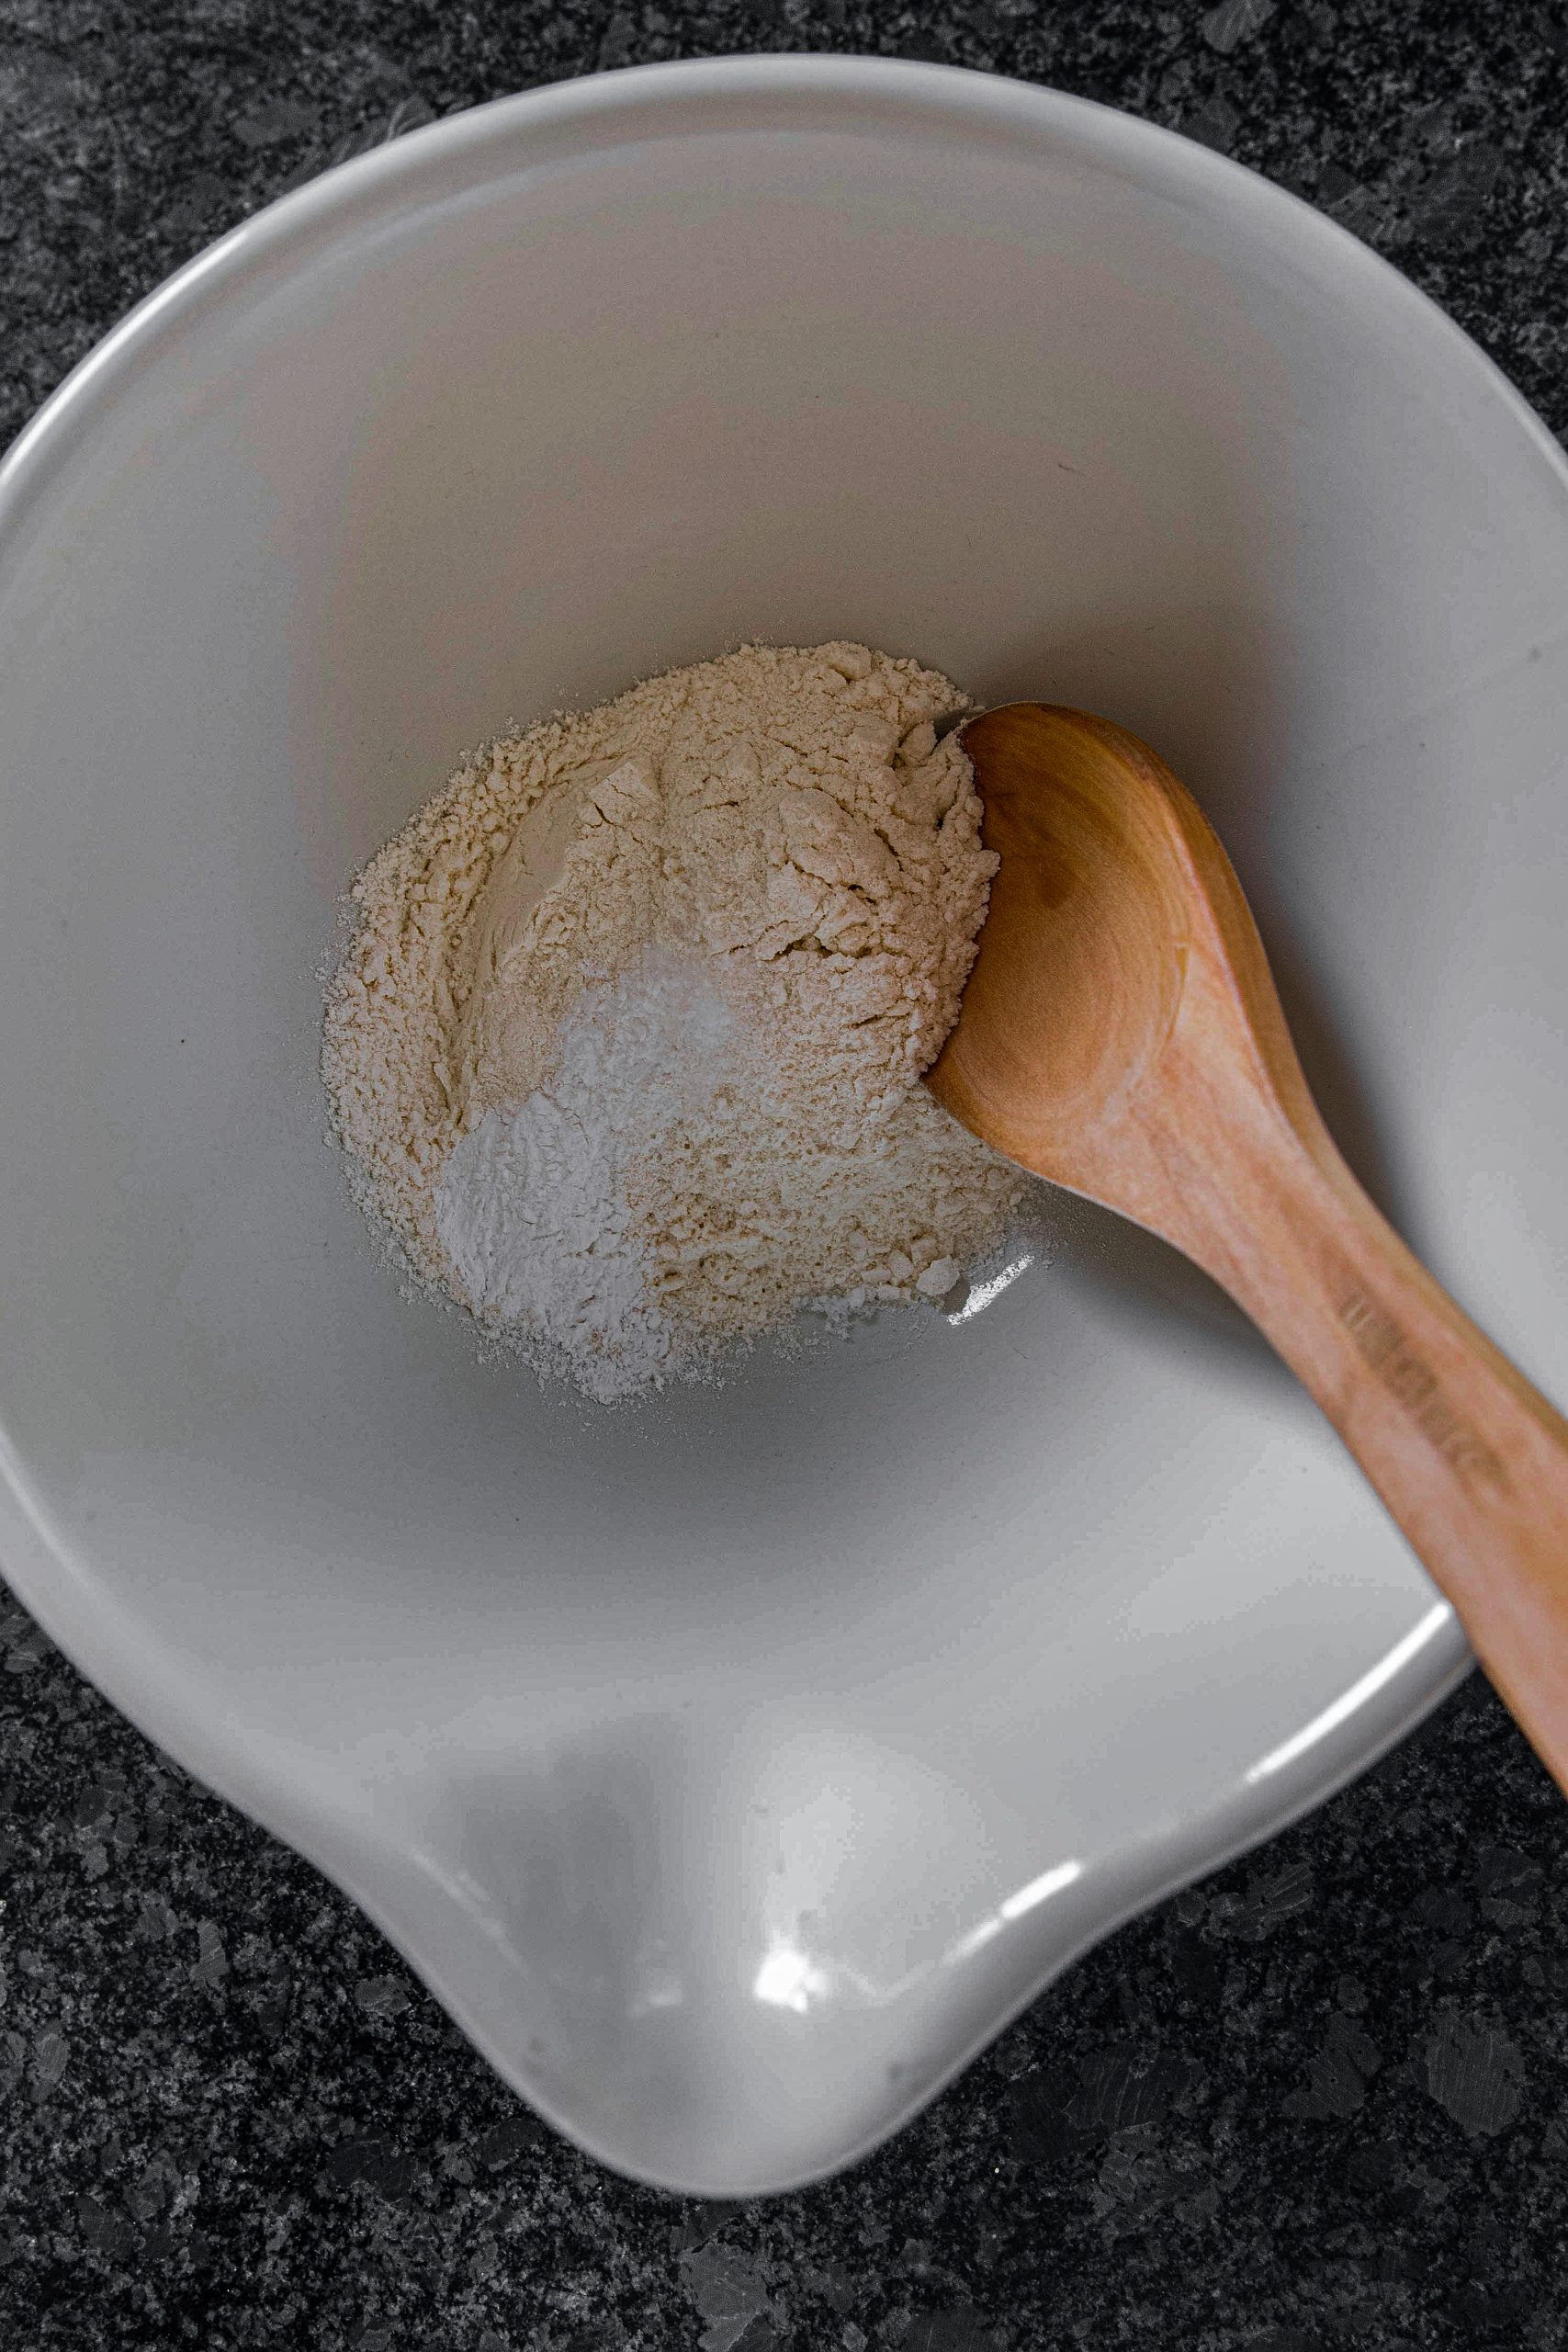  In another bowl, mix all the dry ingredients: flour, baking powder, and salt. Mix until well combined.